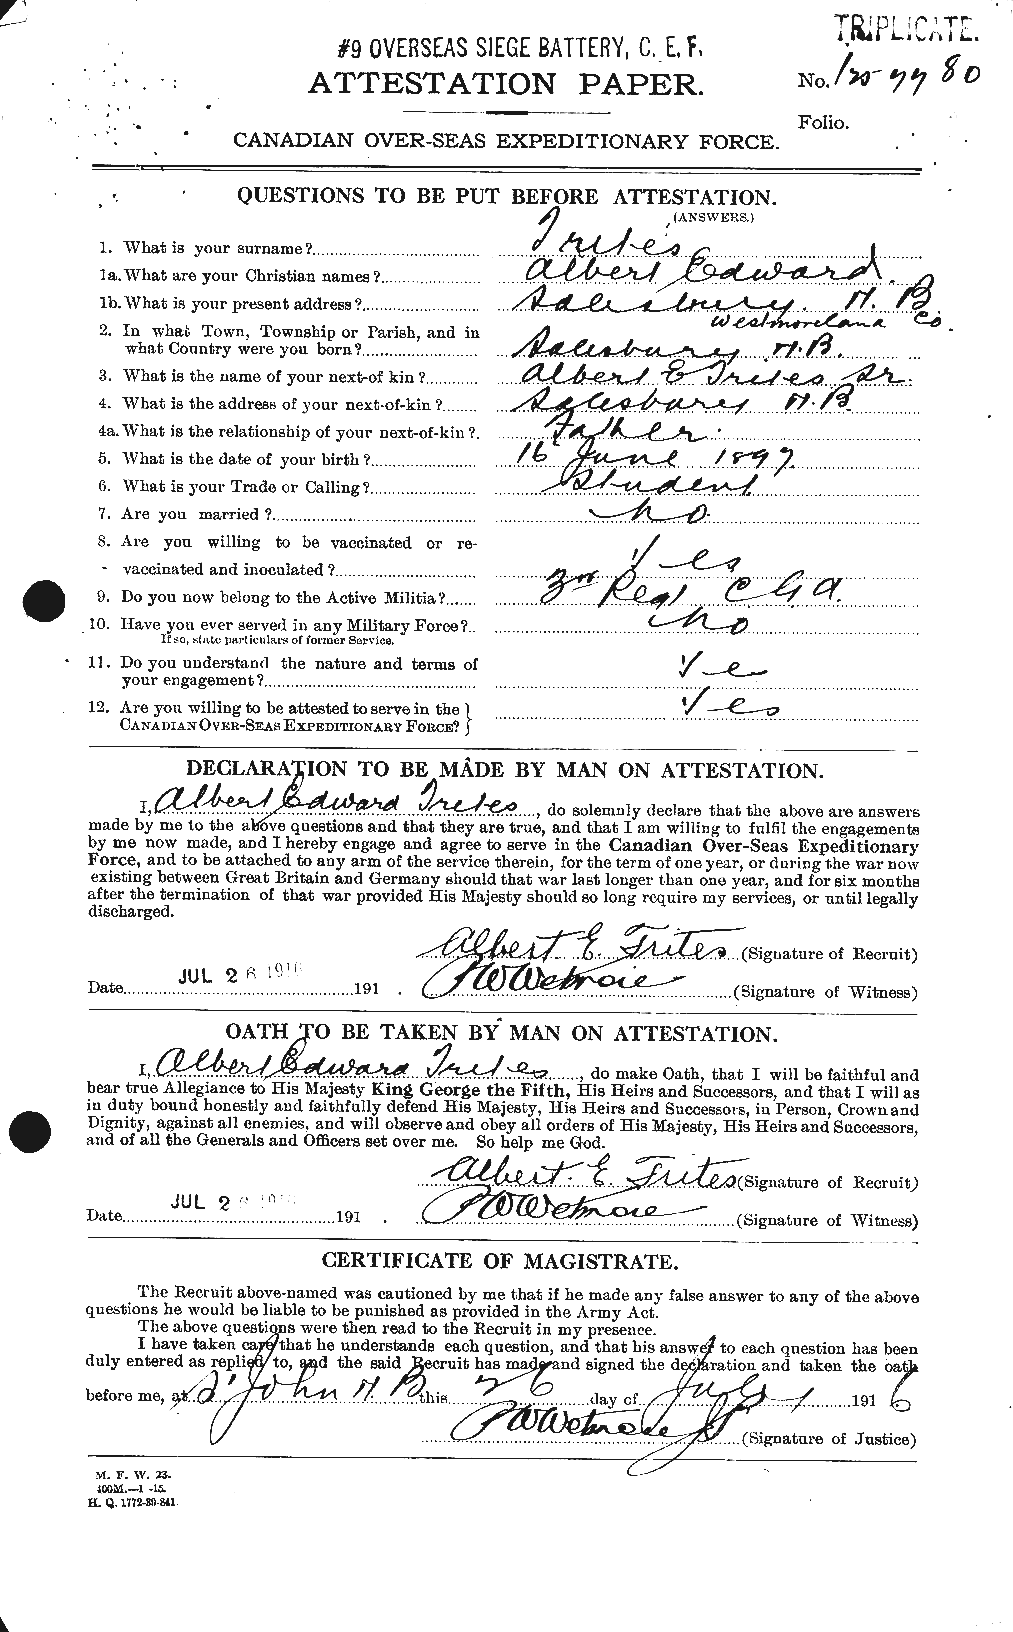 Personnel Records of the First World War - CEF 640145a